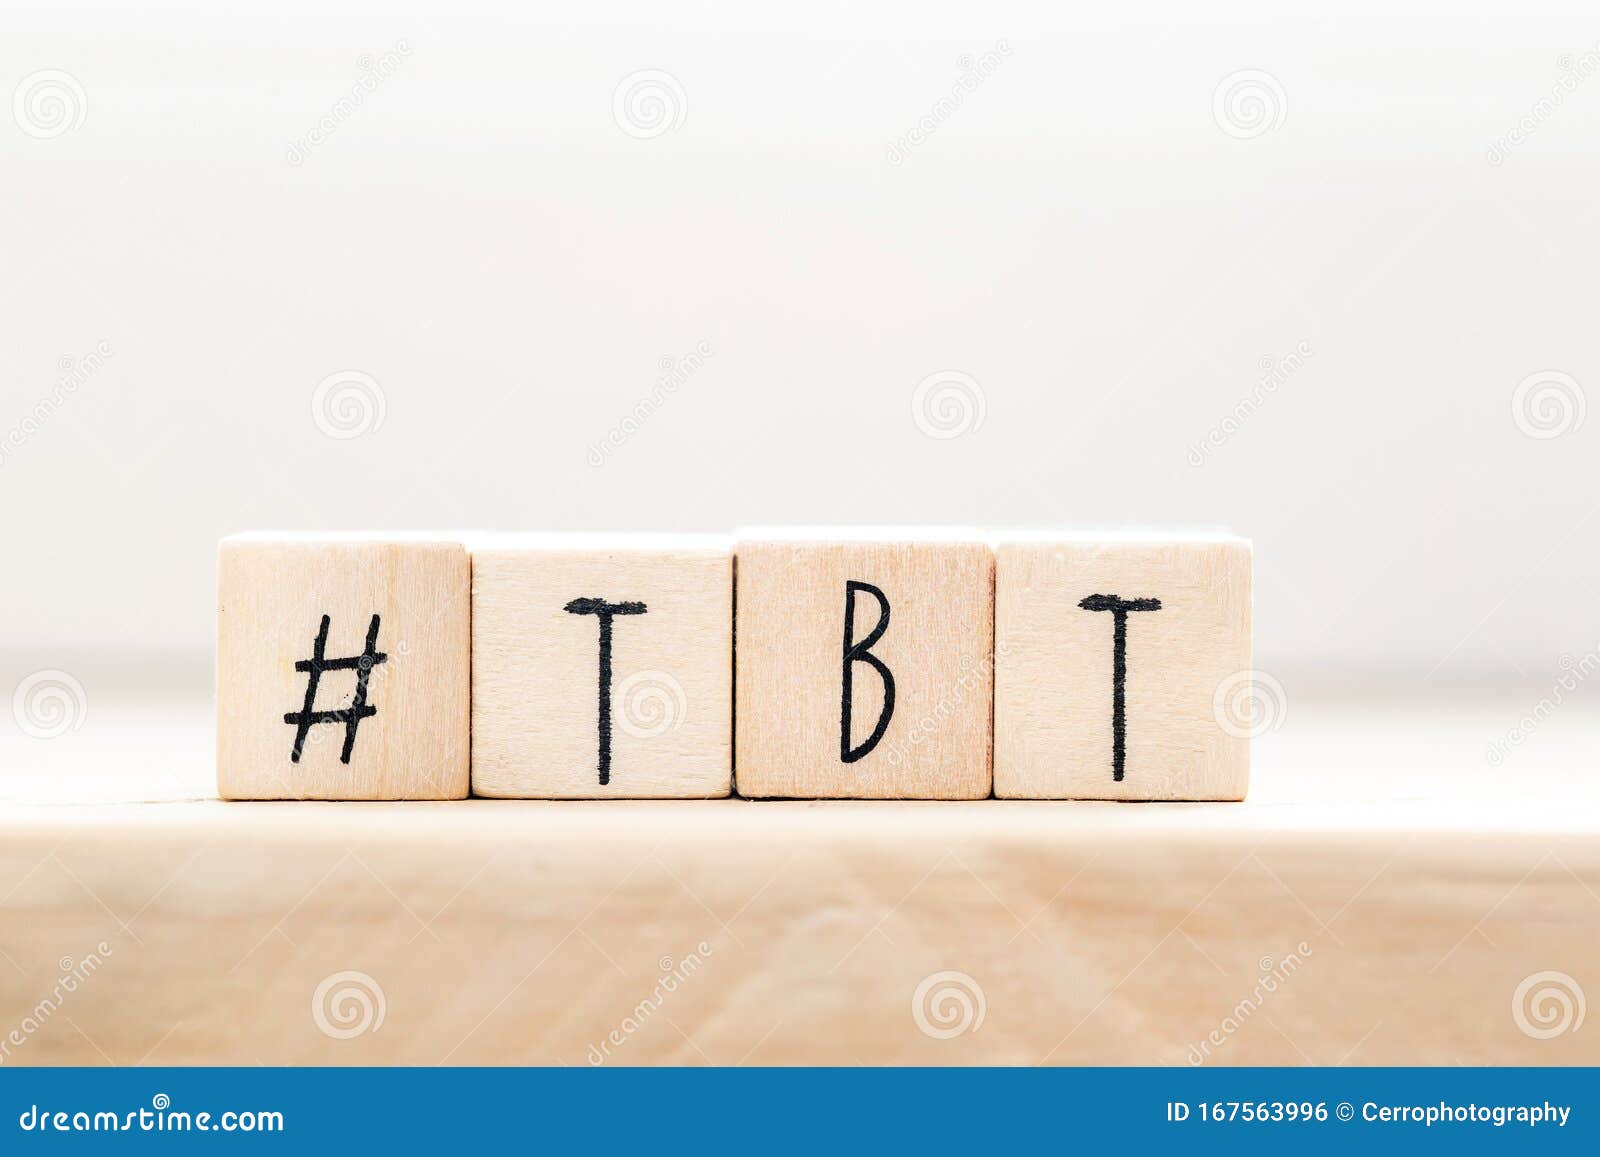 wooden cubes with hashtag tbt, meaning throwback thursday near white background social media concept